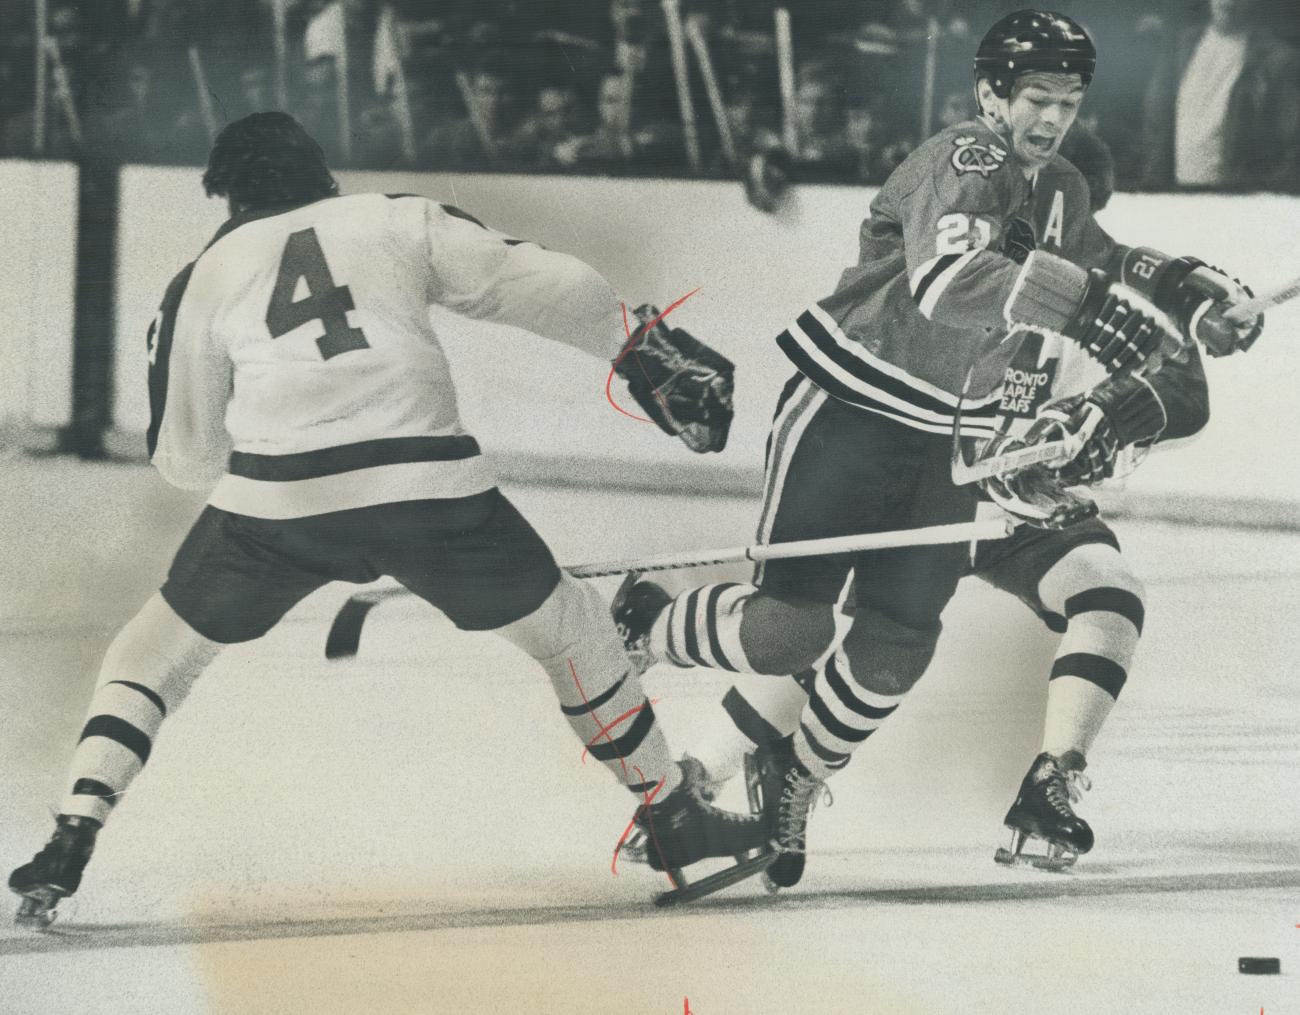 Stan Mikita tackles another hockey player.